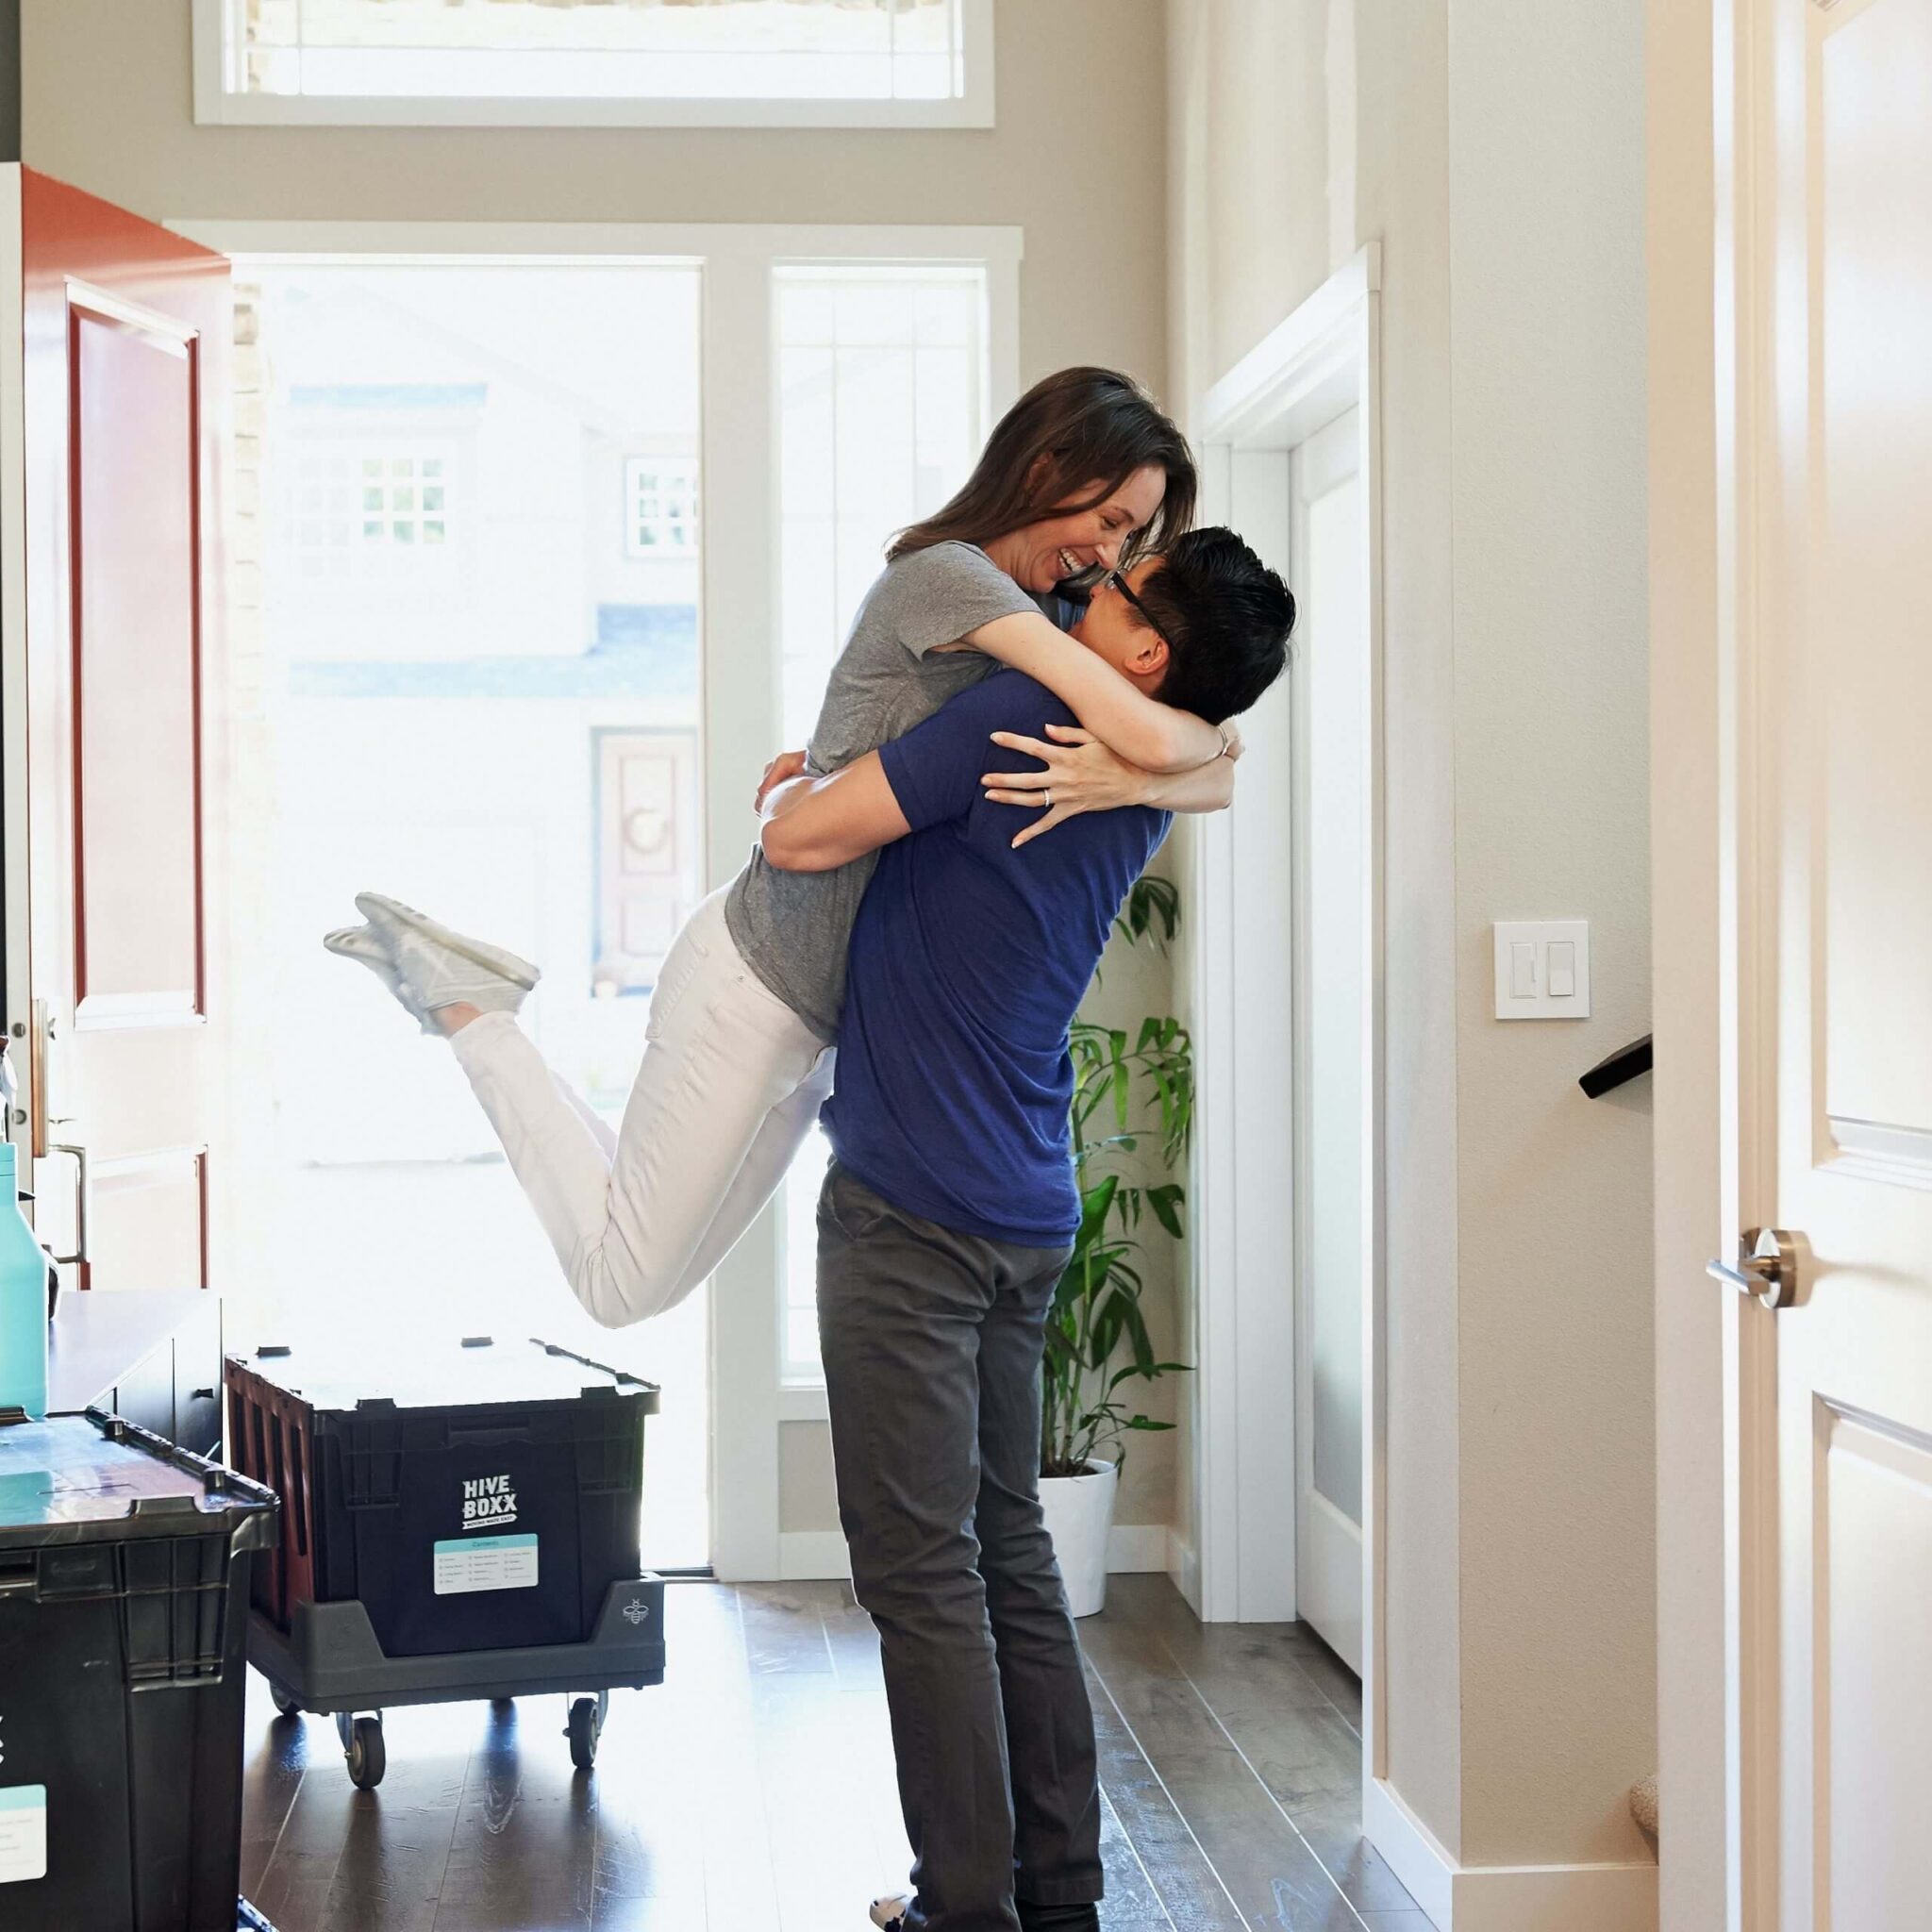 man and woman hugging showing excitement in house doorway.